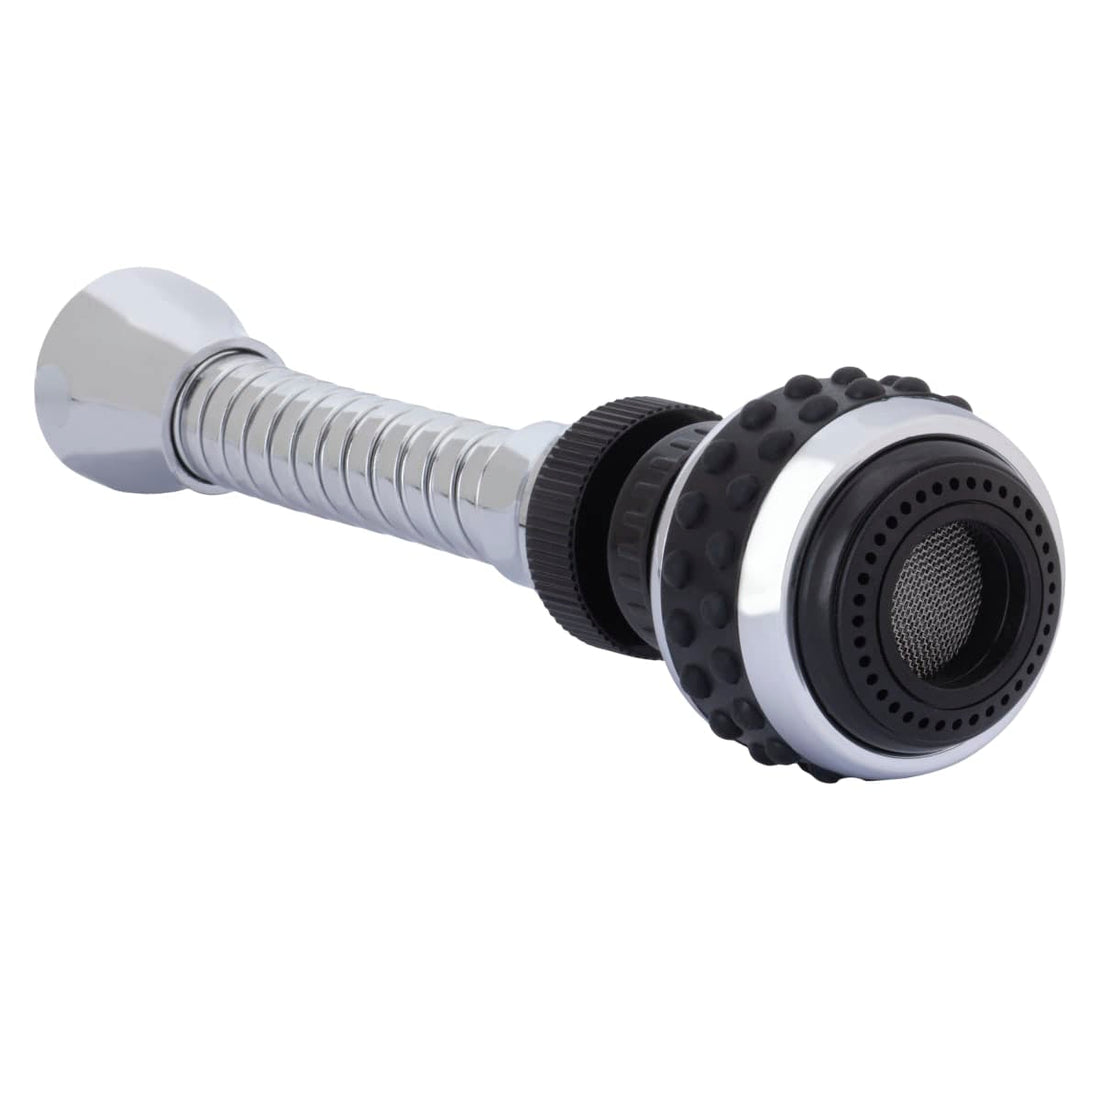 AERATOR WITH FLEXIBLE HOSE FOR KITCHEN TAP 2 JETS CONNECTION M22X1 / M24X1 - best price from Maltashopper.com BR430007467